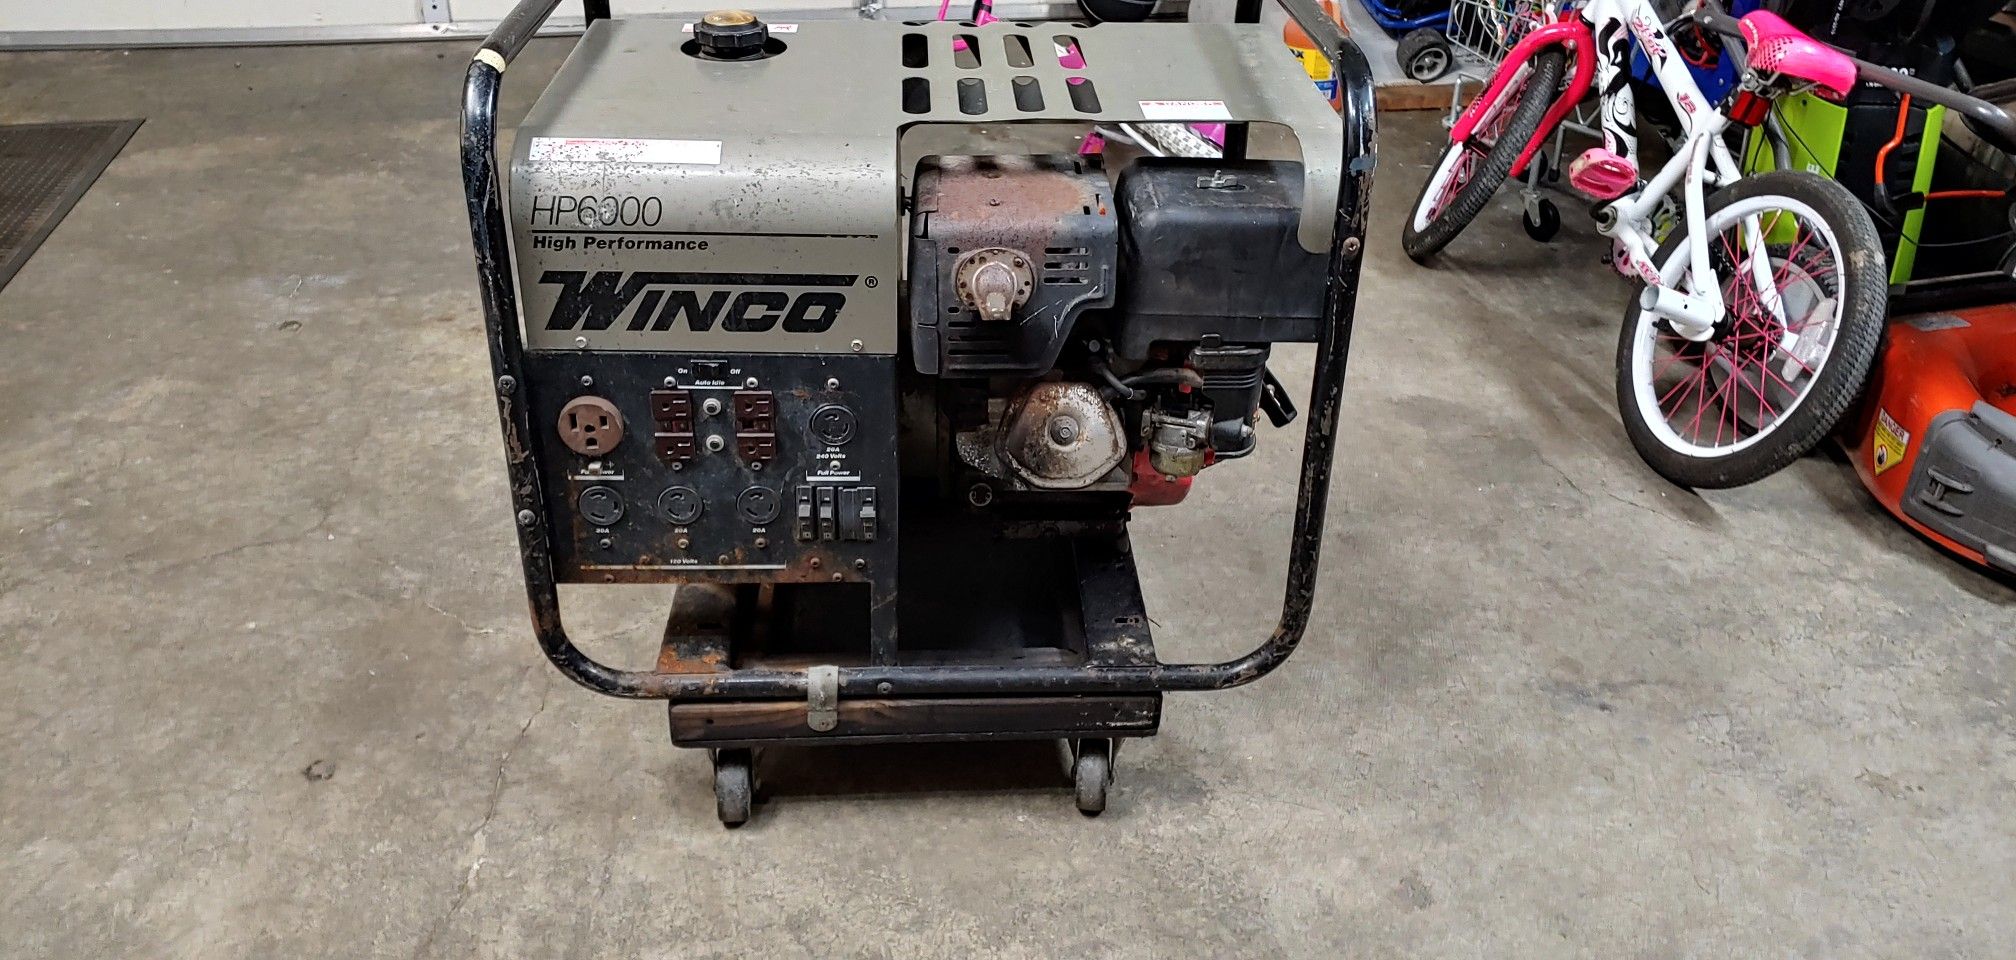 WinCo hp 6000 generator $500 need gone today